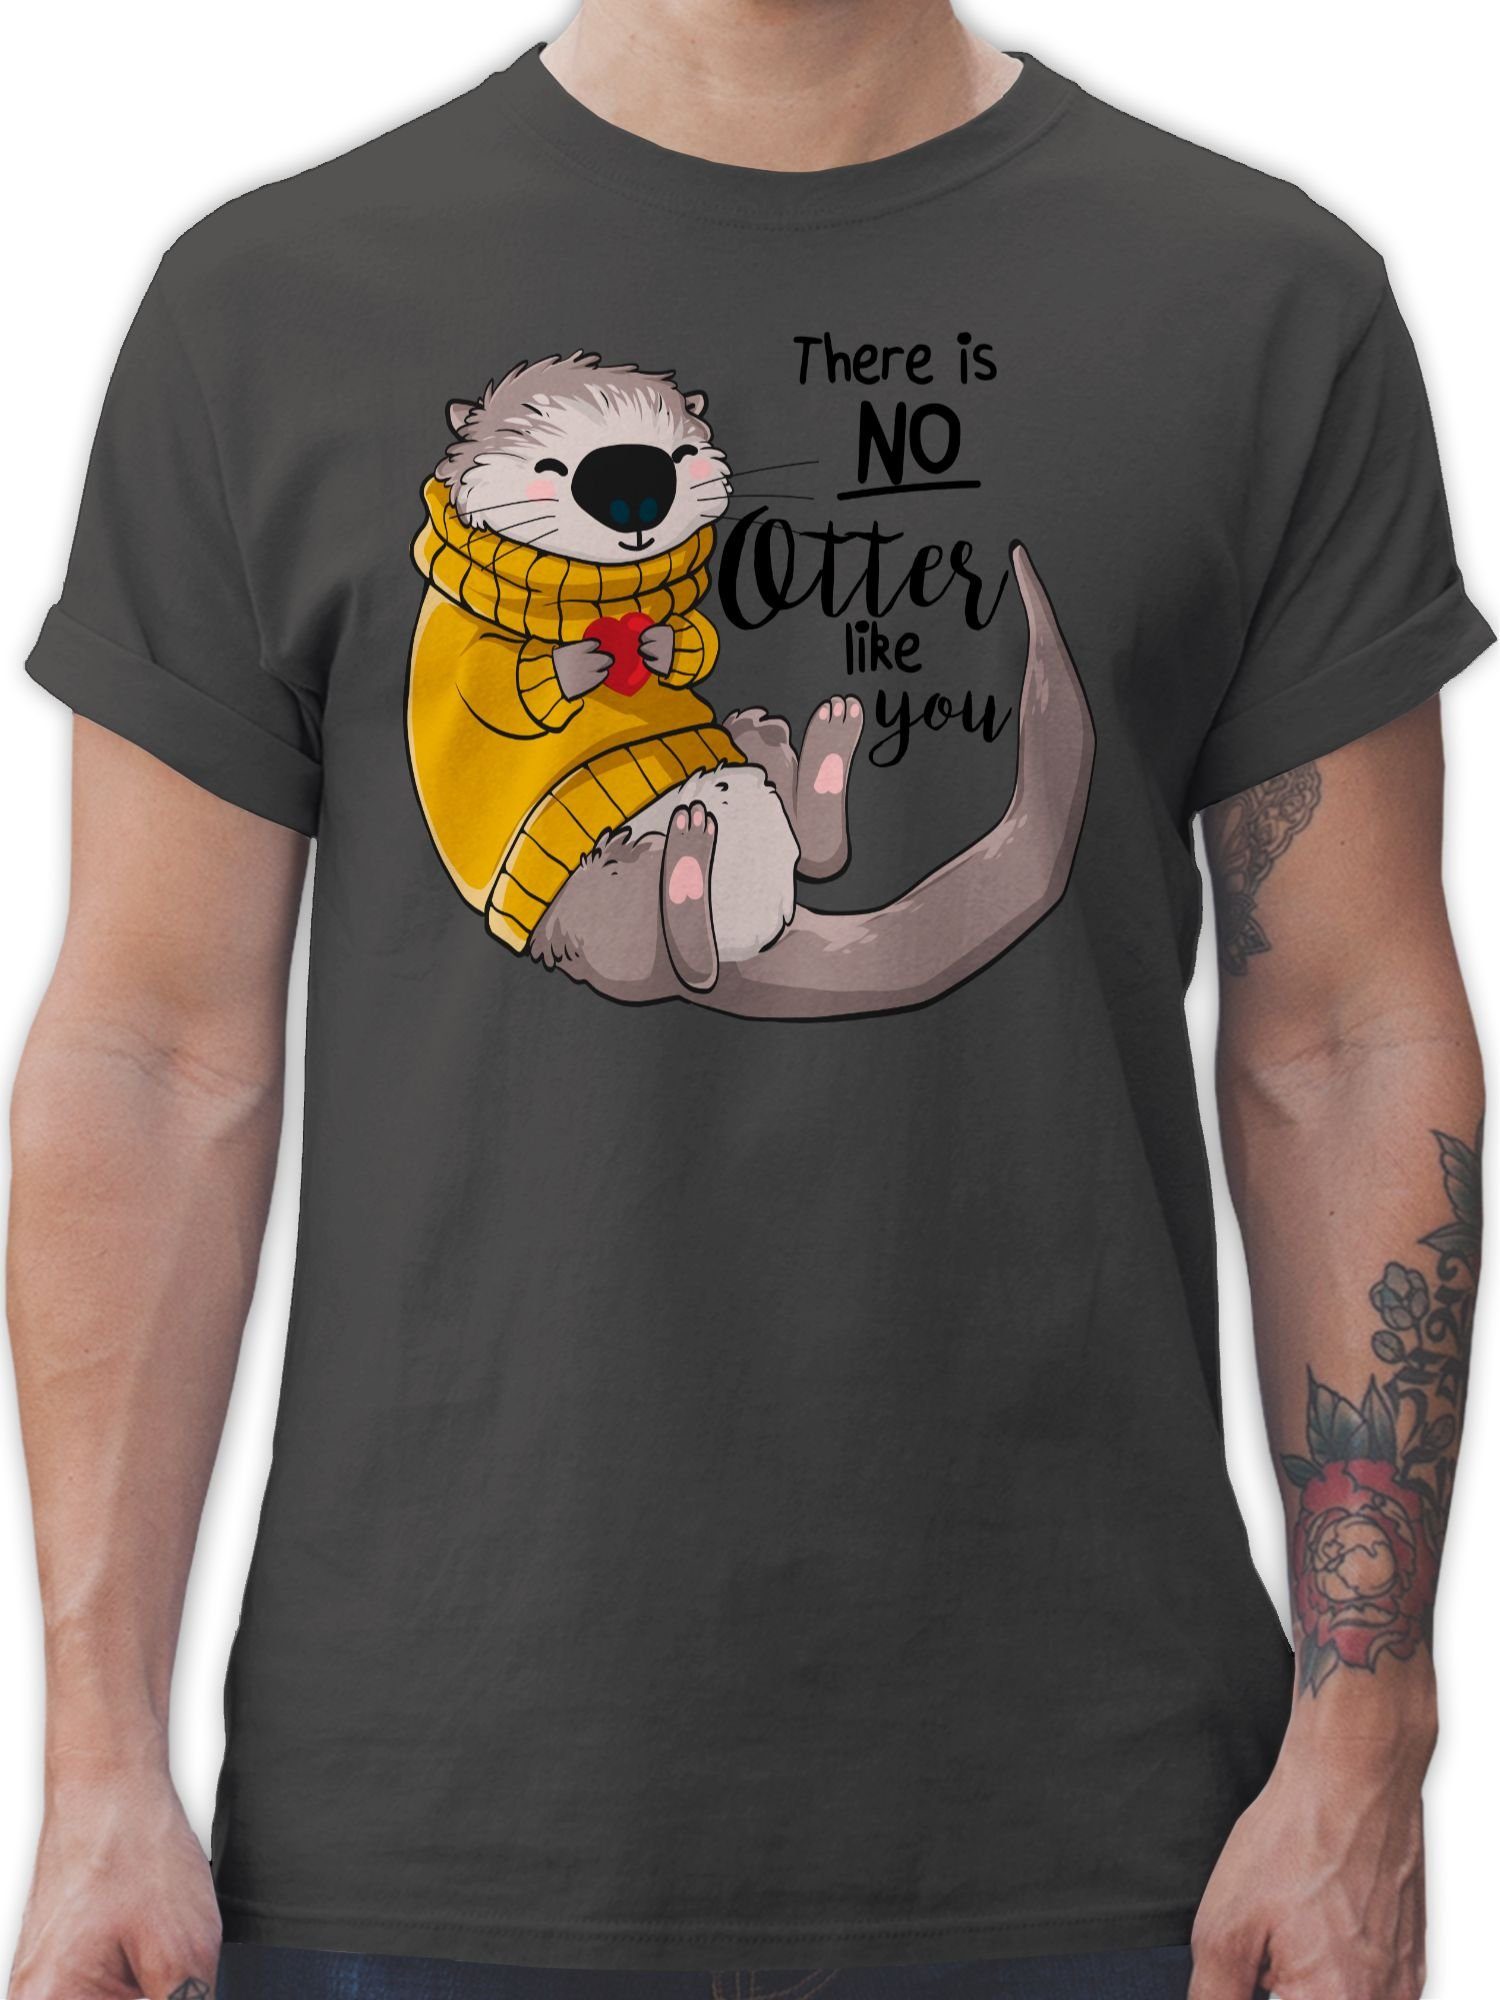 Shirtracer T-Shirt There is no Otter like you Sprüche Statement 1 Dunkelgrau